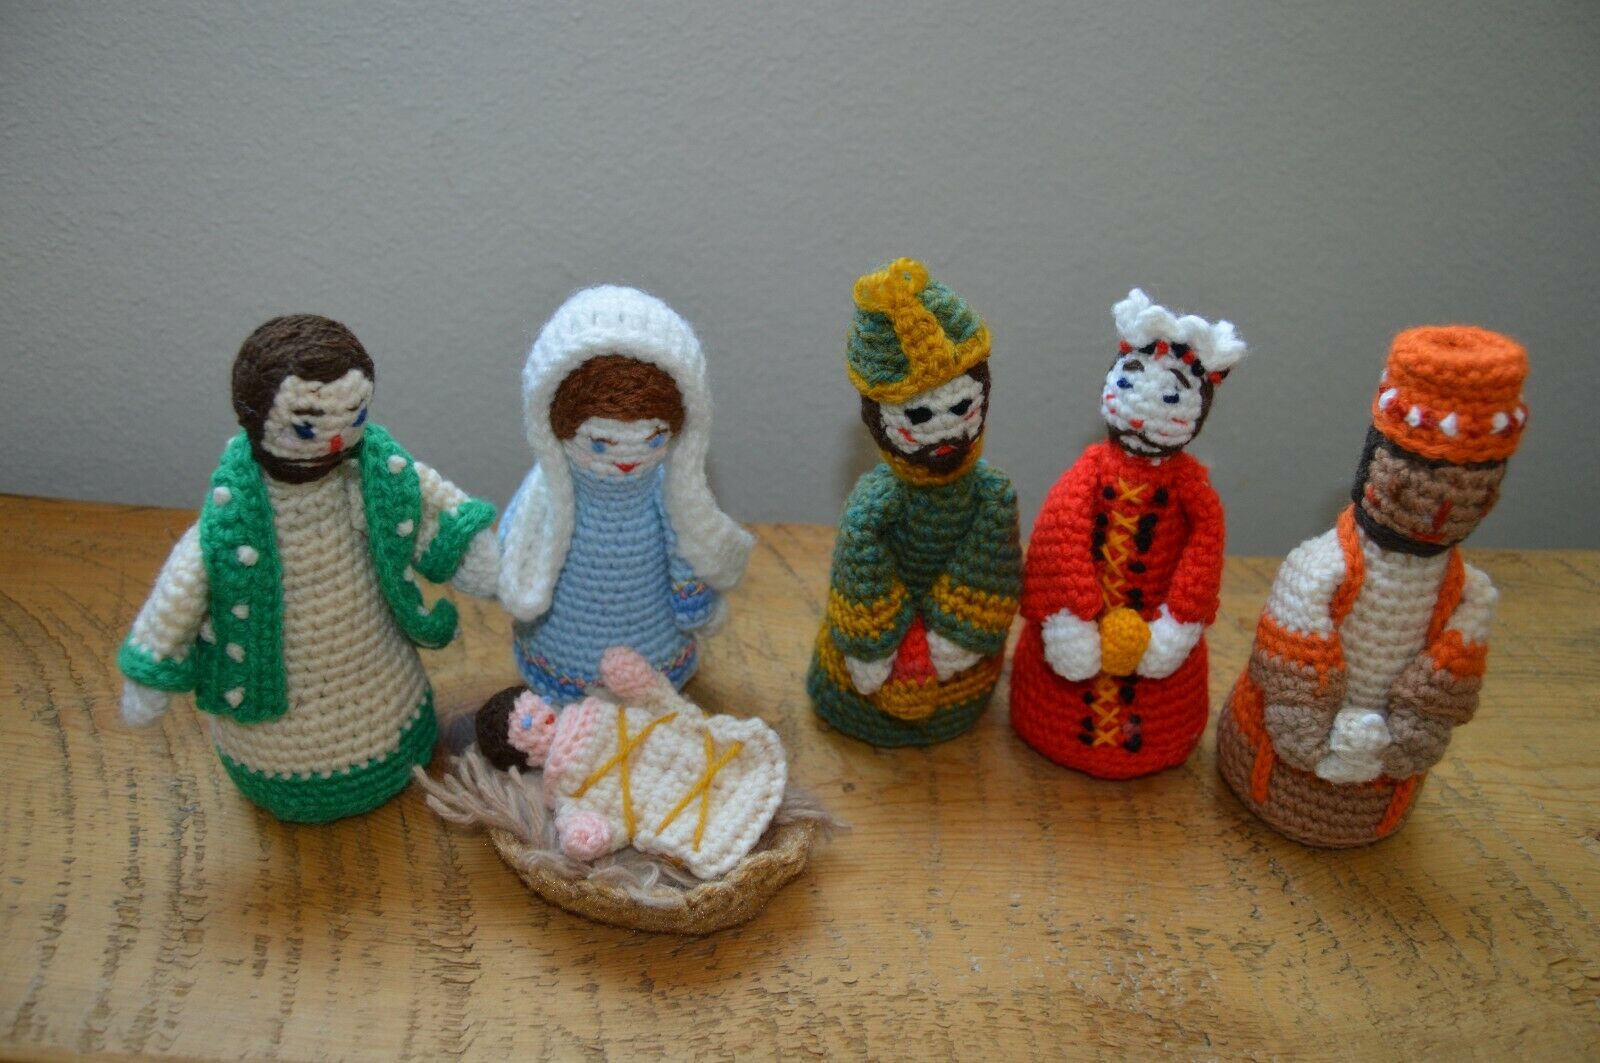 6 Piece Hand Knit Nativity Figures 6 To 7 Inches, 3 Wise Men, Mary, Joseph, Baby